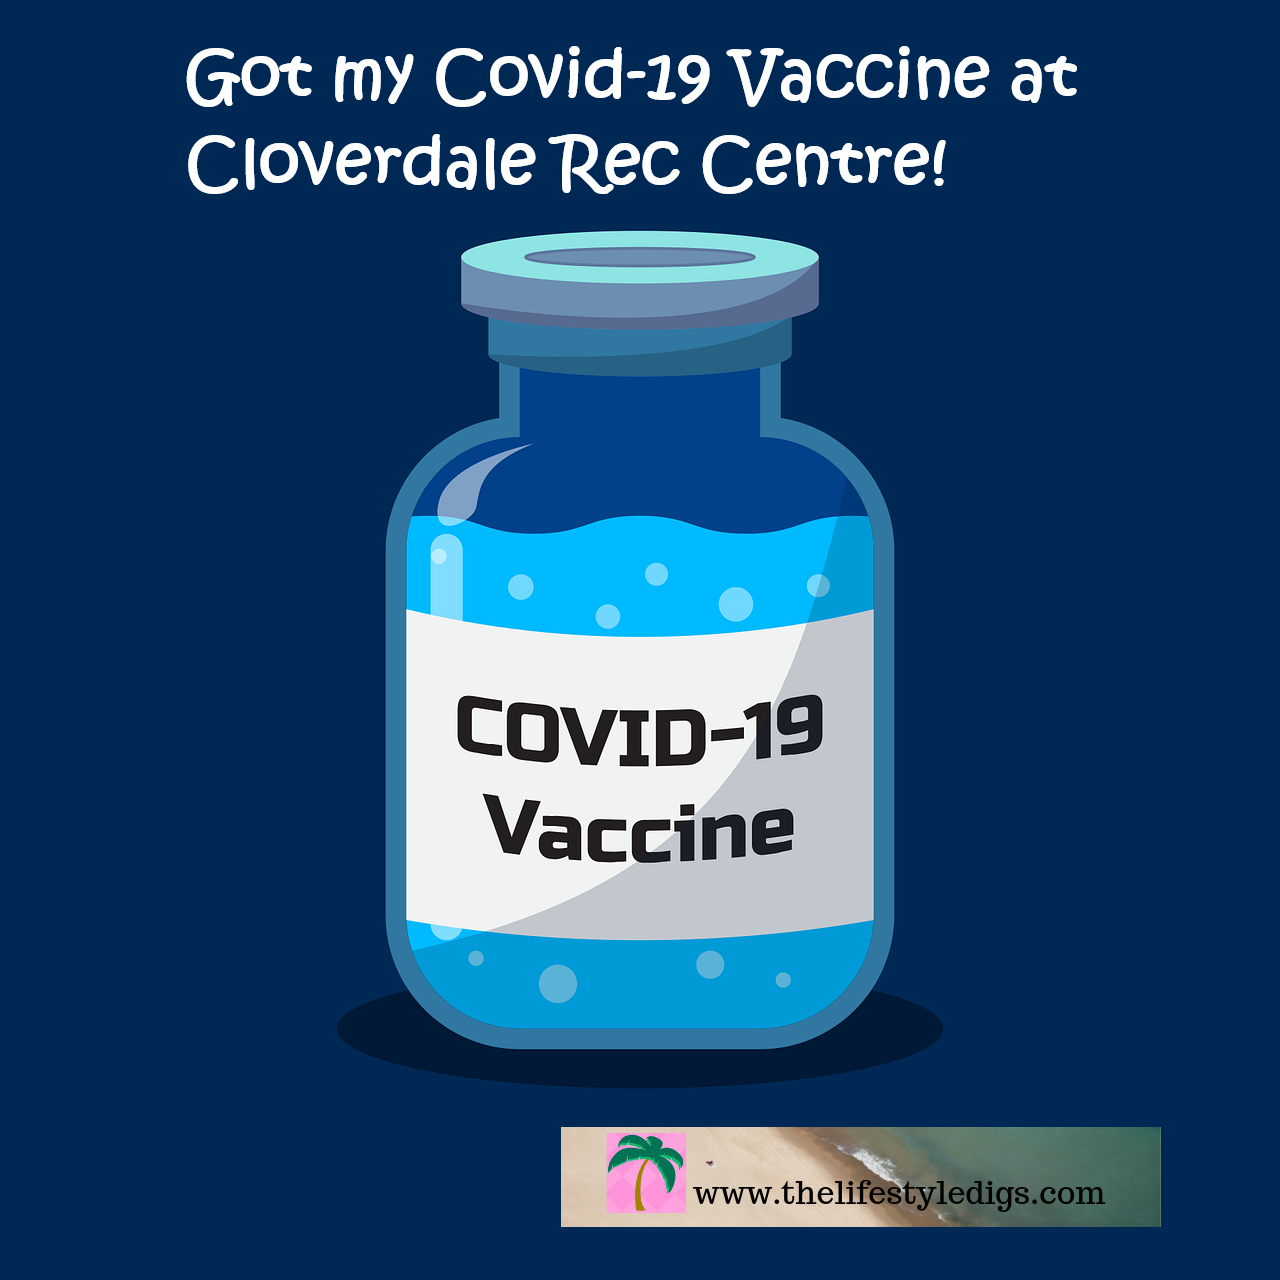 Got my Covid-19 Vaccine at Cloverdale Rec Centre!